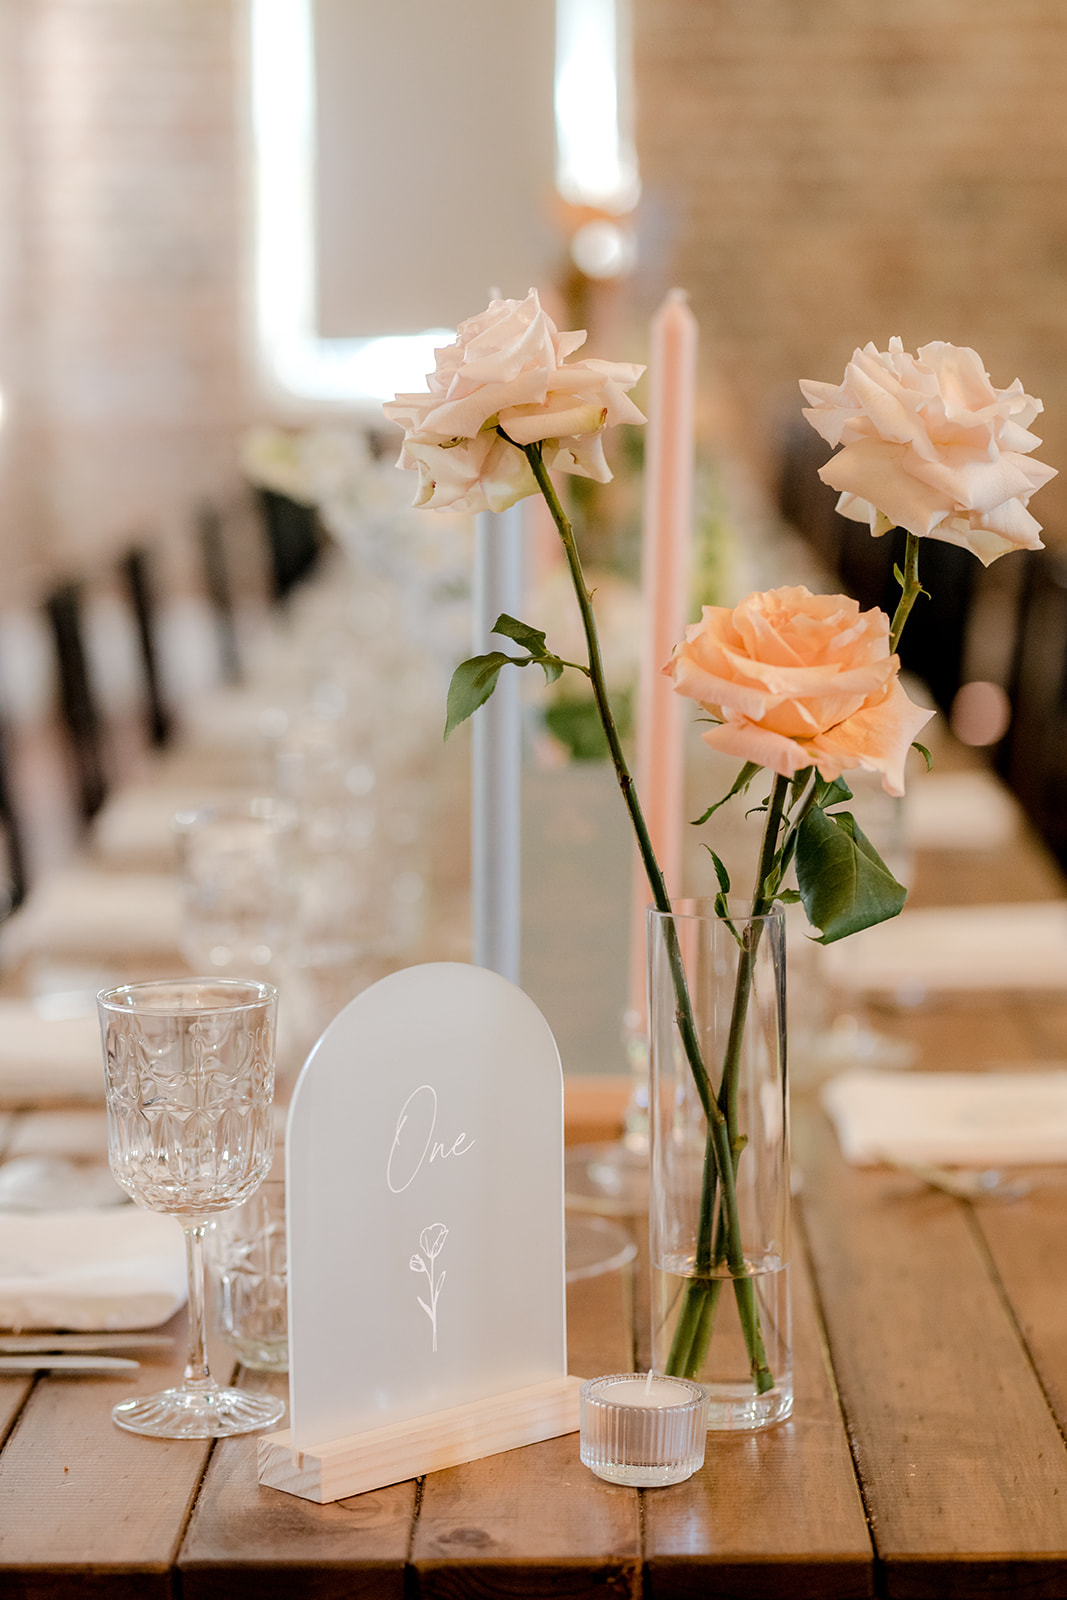 Romantic spring-inspired wedding reception styling for an elegant country wedding at Montrose House.